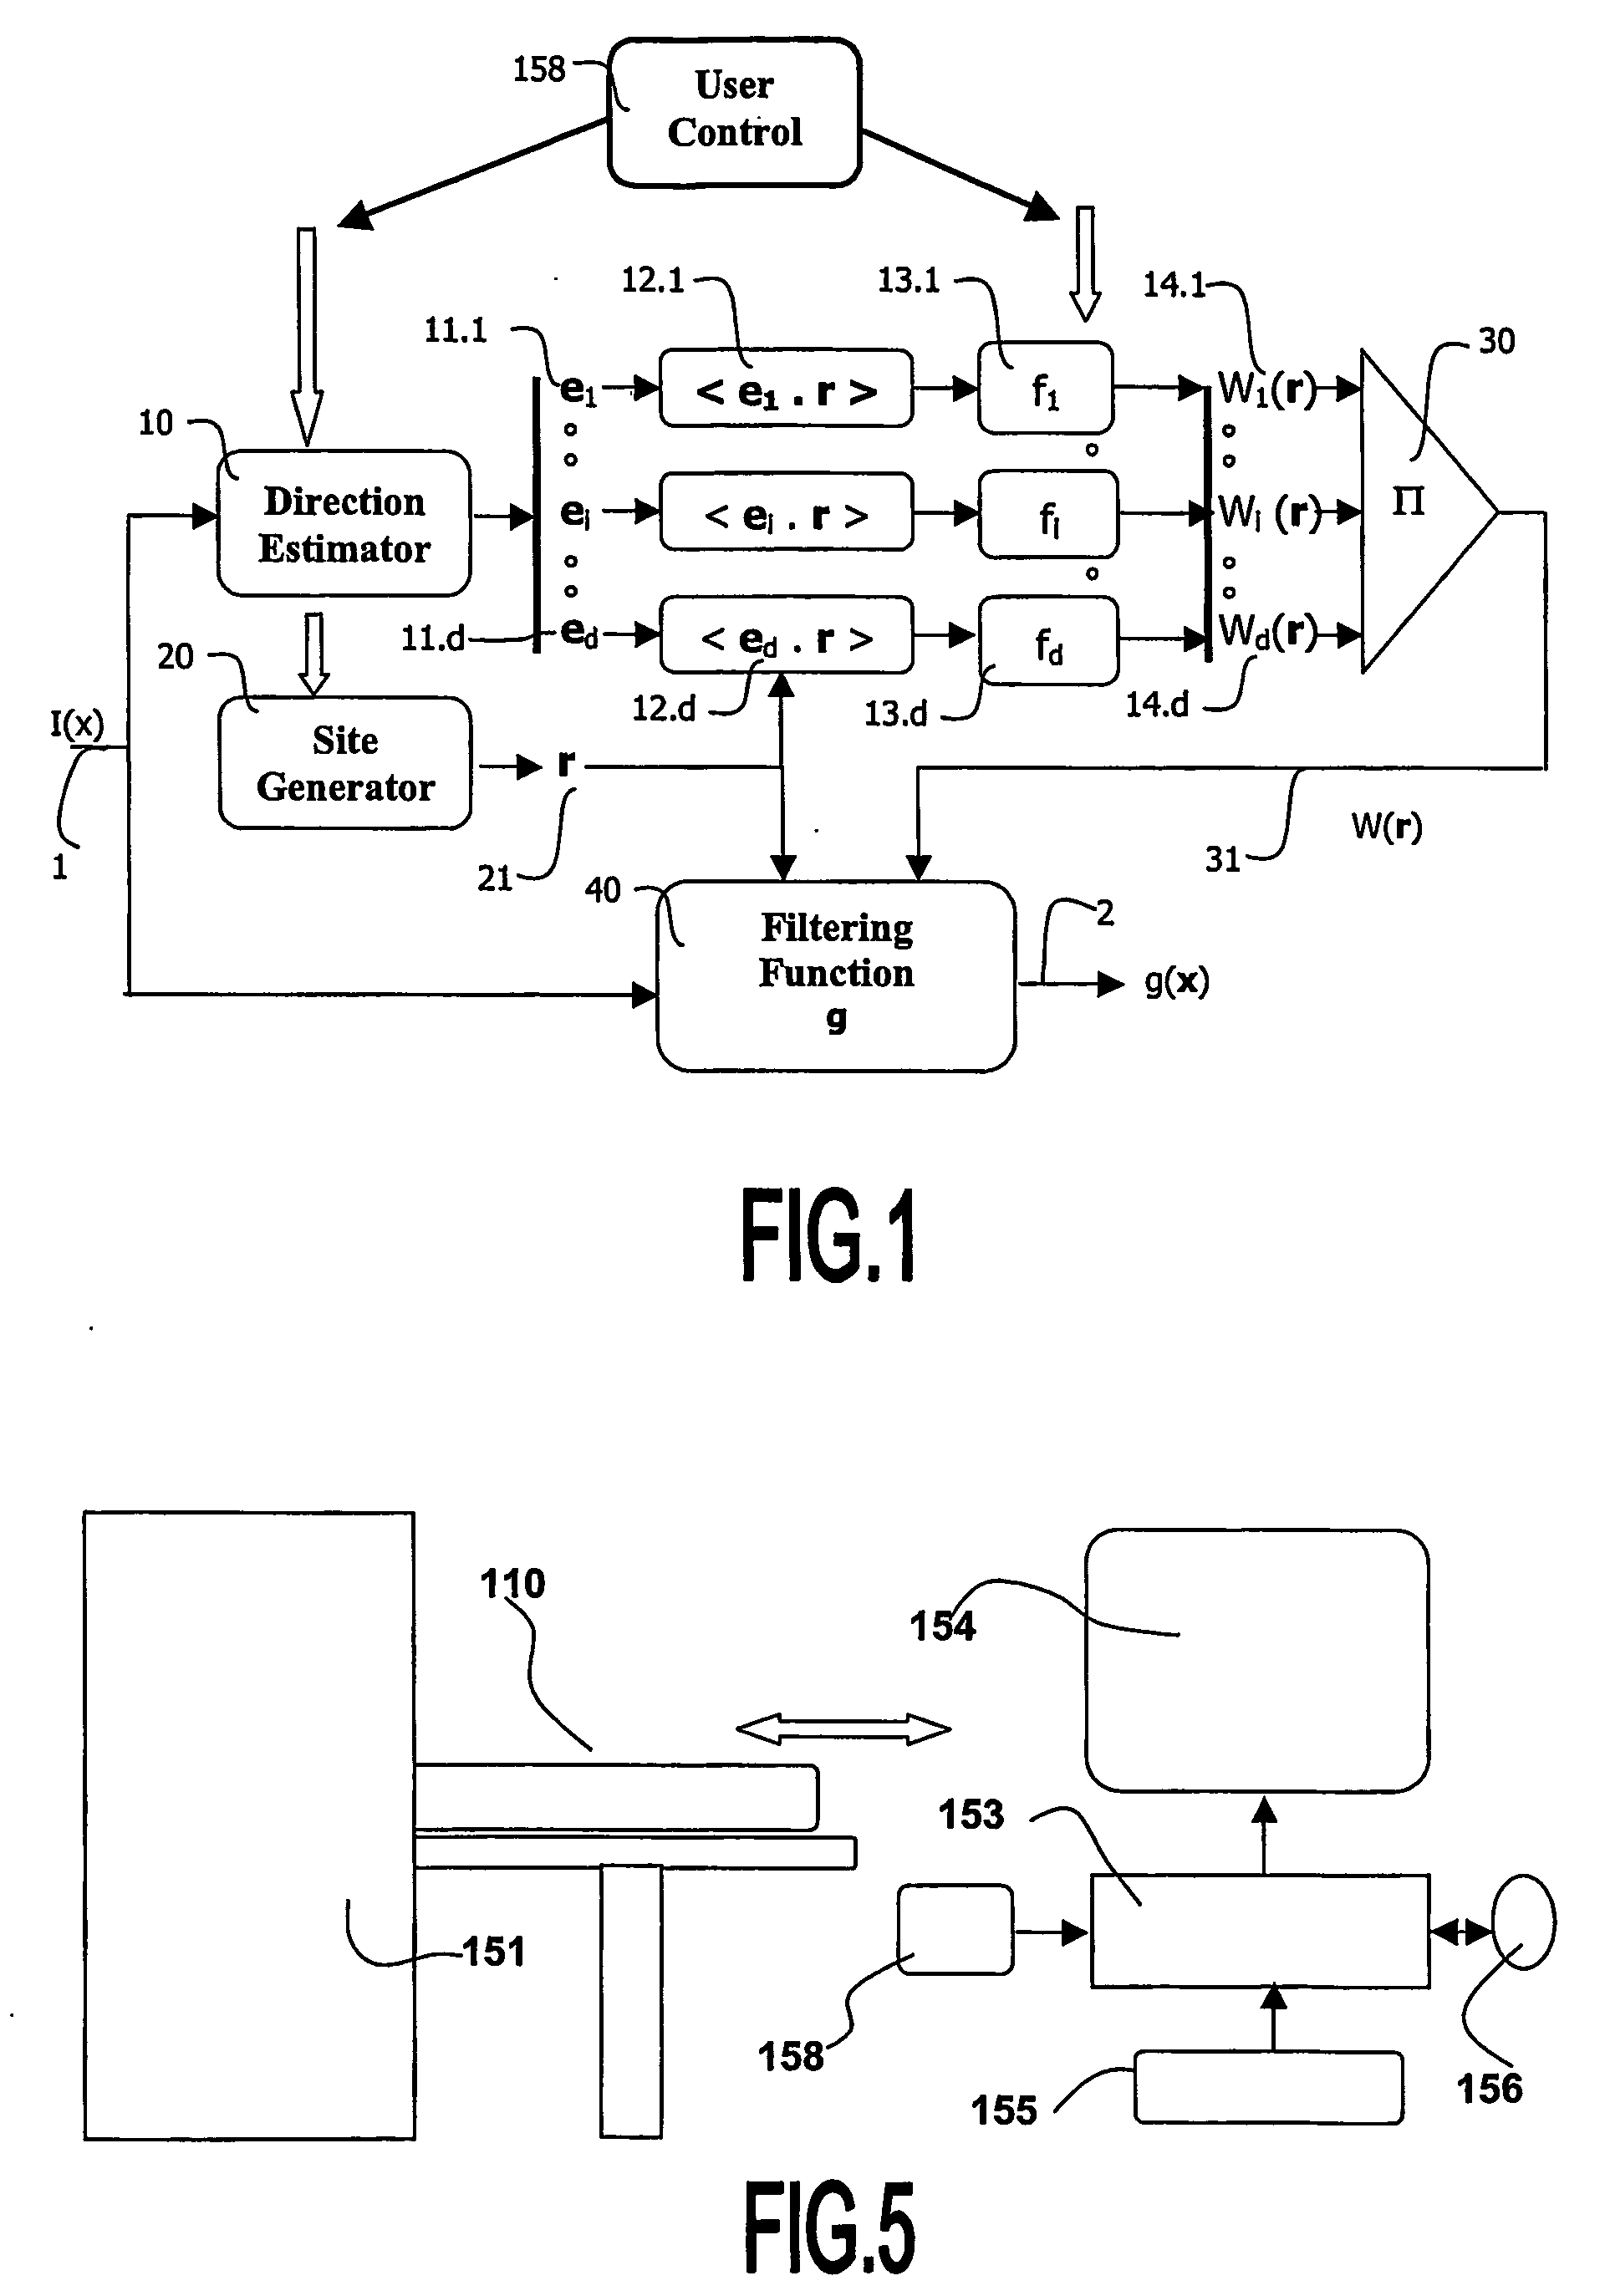 Image viewing and method for generating filters for filtering image feaures according to their orientation